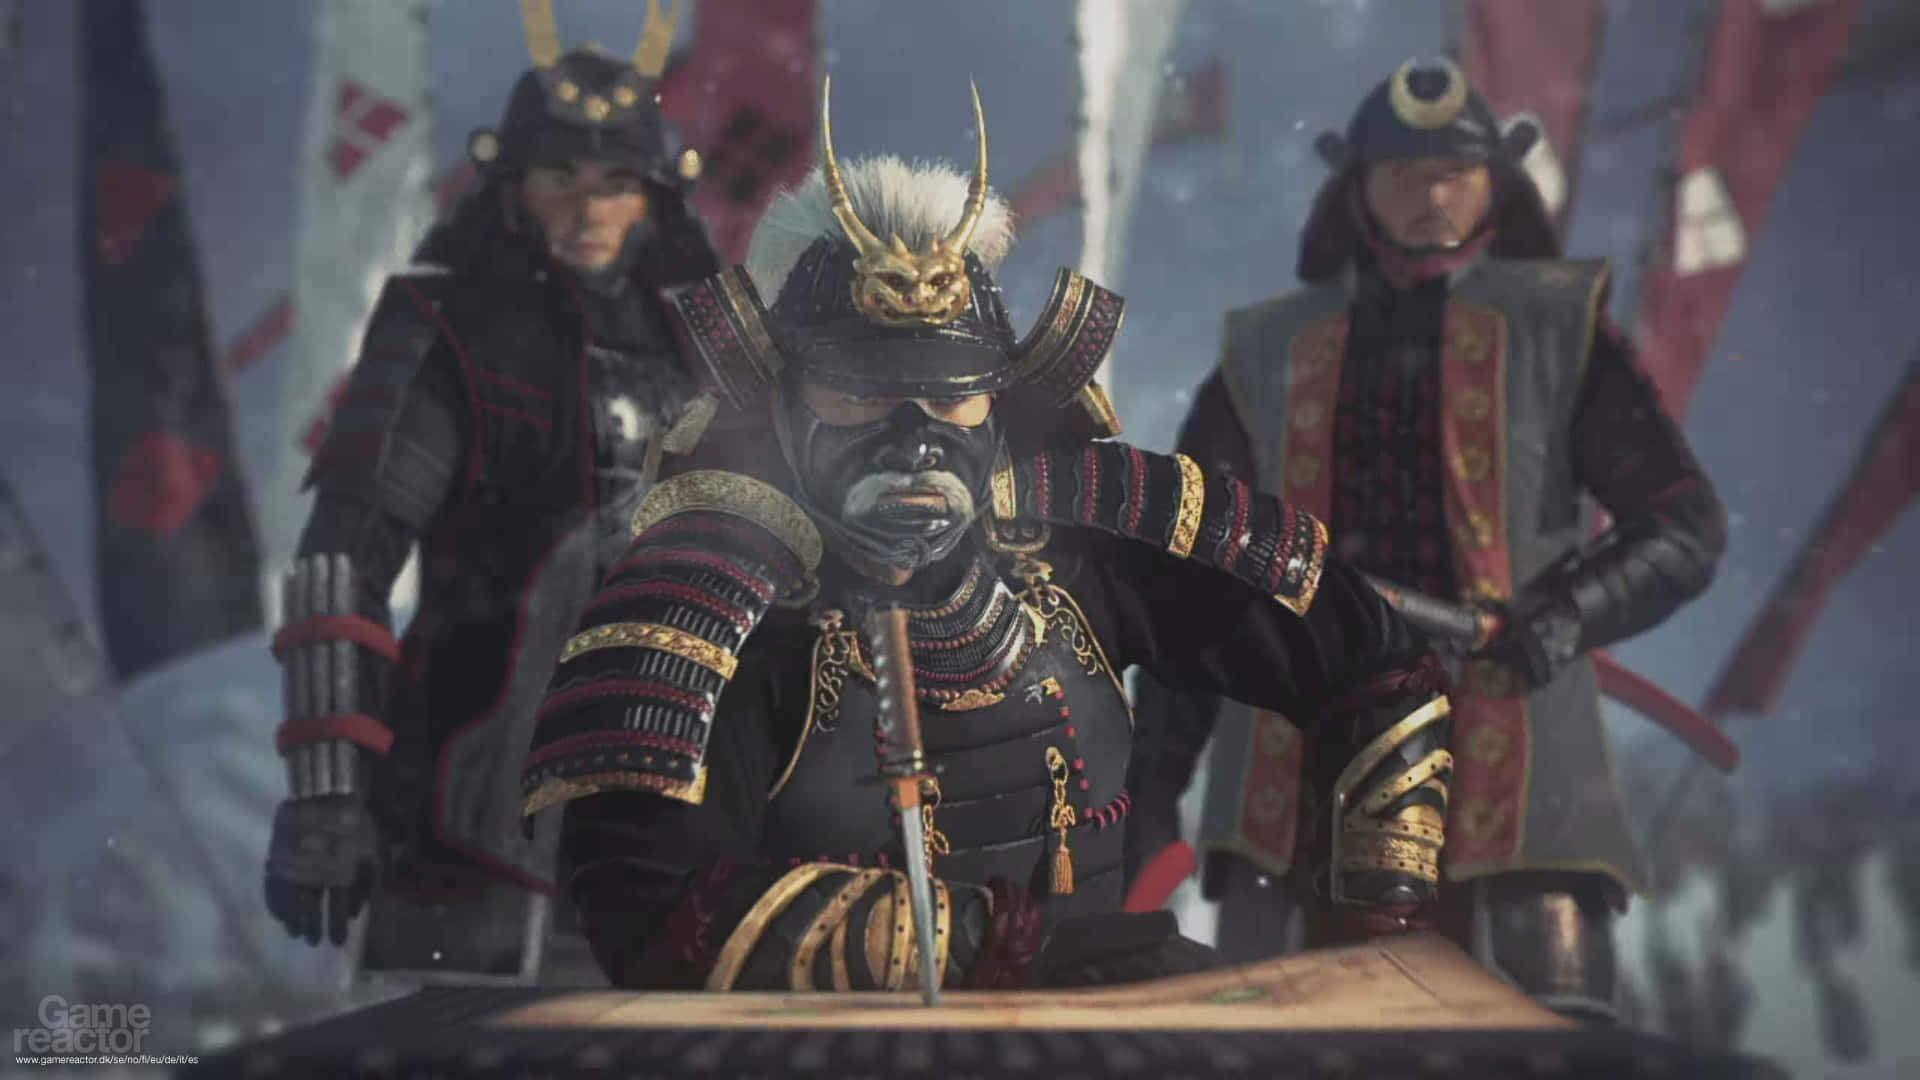 Travel back to the Feudal Age of Japan in Best Total War Shogun 2